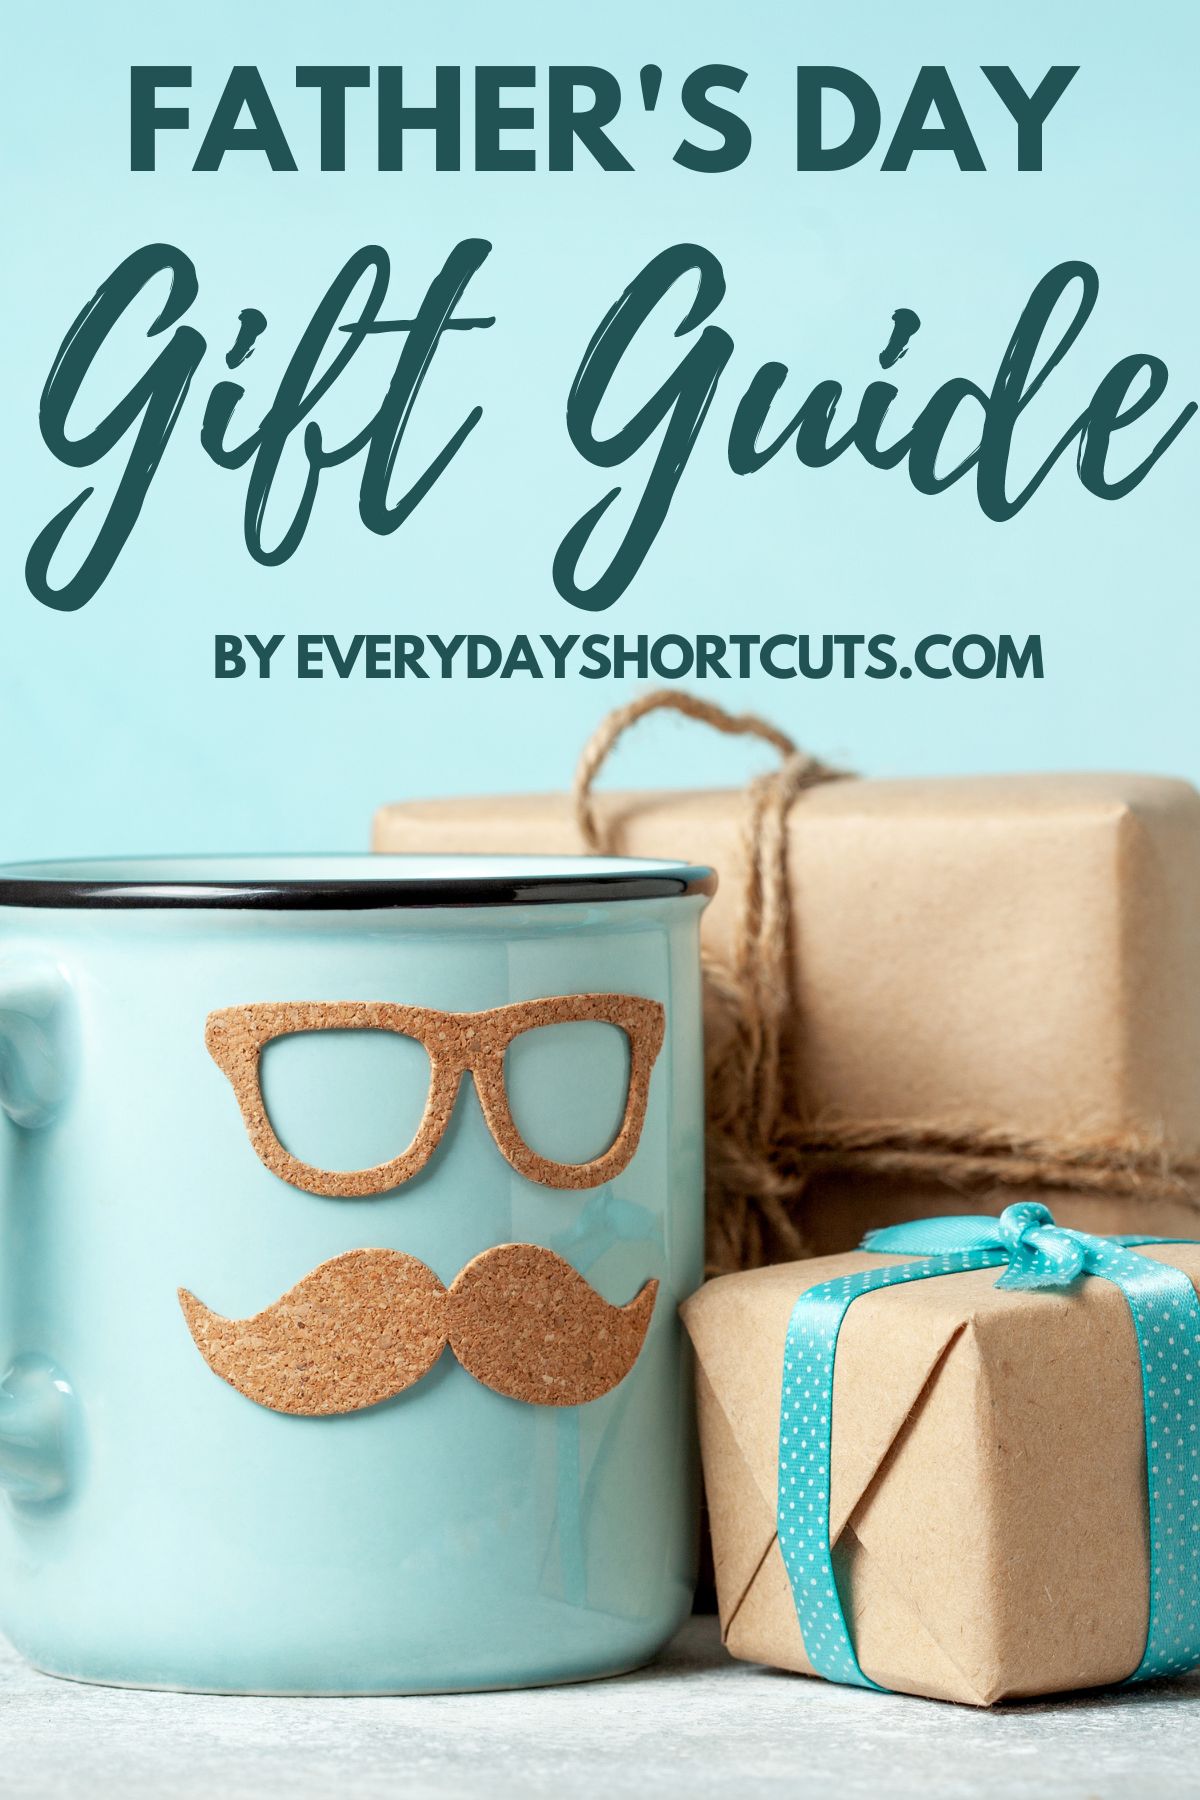 Fathers Day gift guide